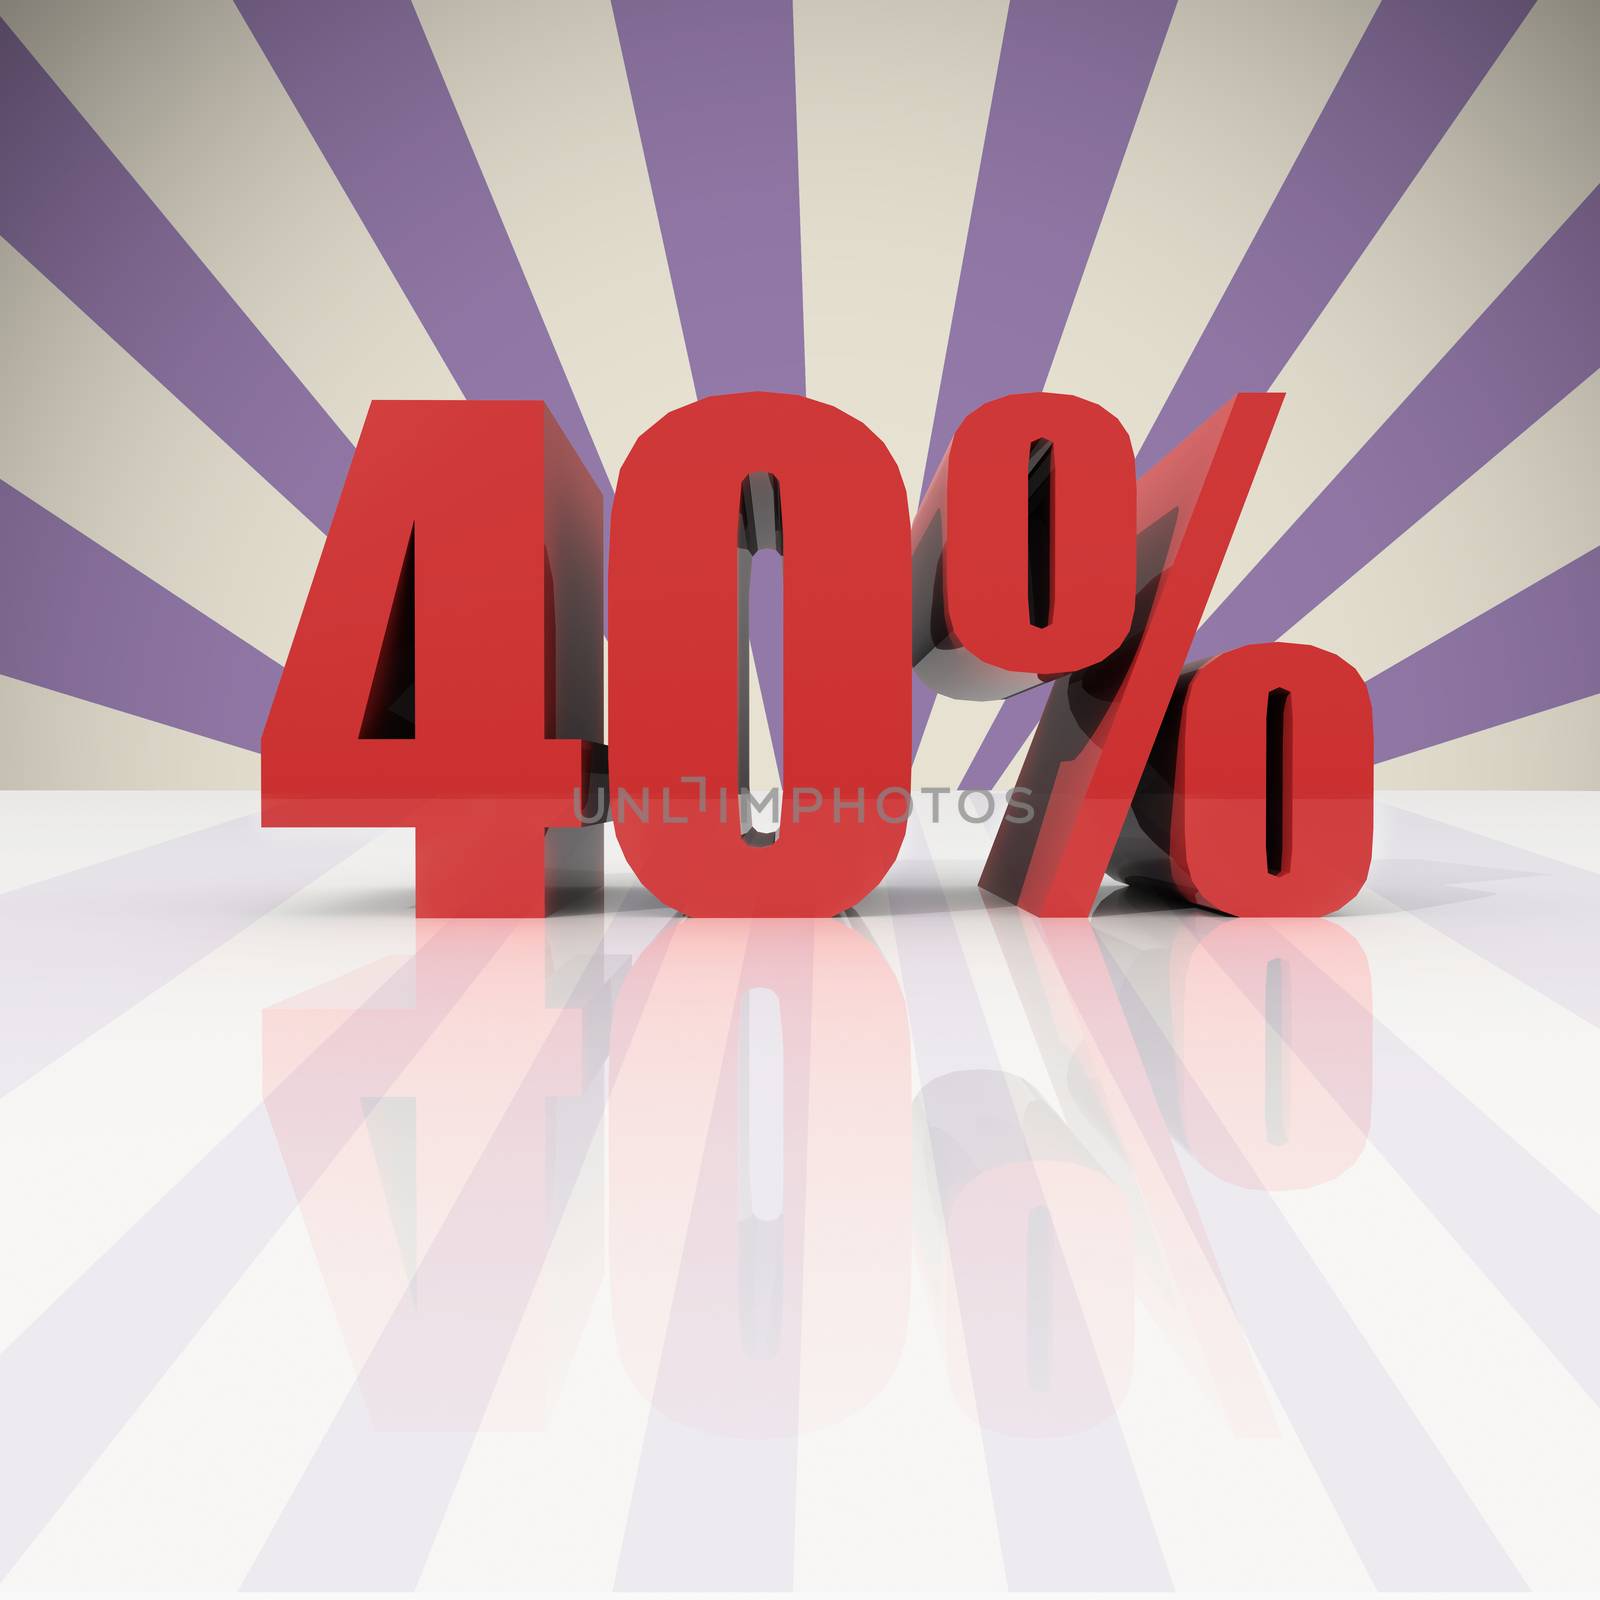 3D rendering of a 40 percent in red letters on a violet background 